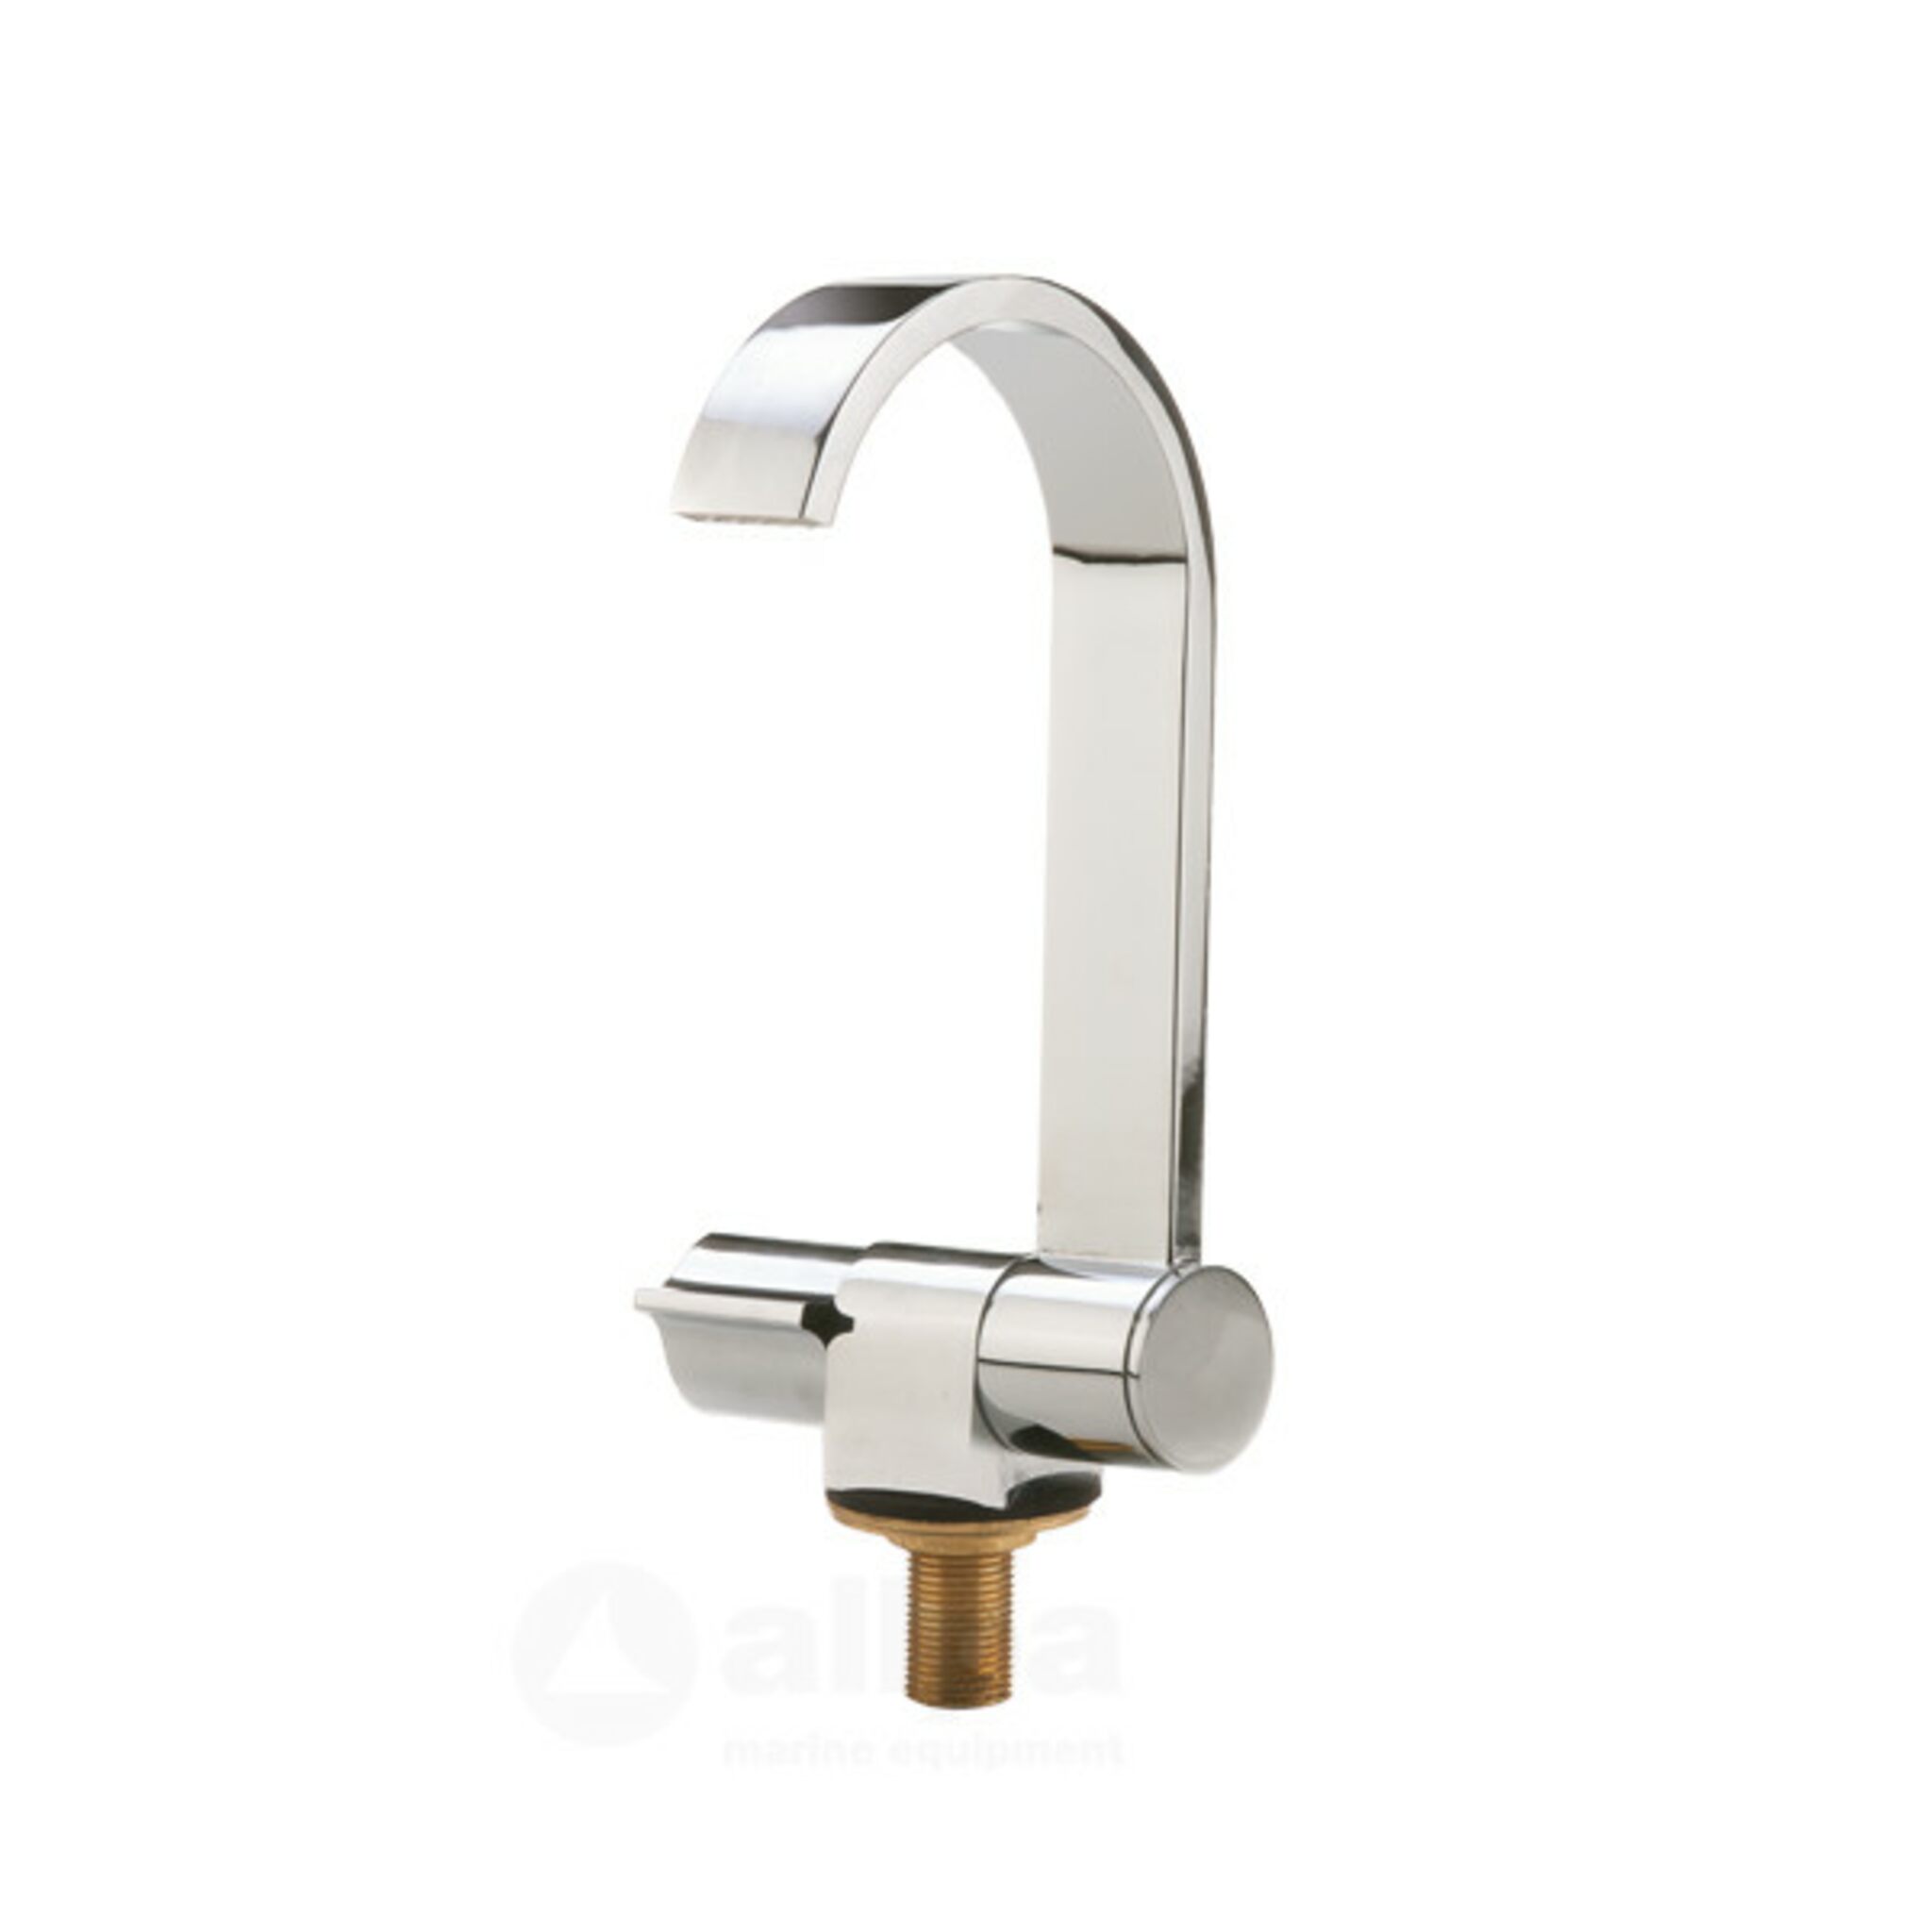 Faucet chrome plated and swivel